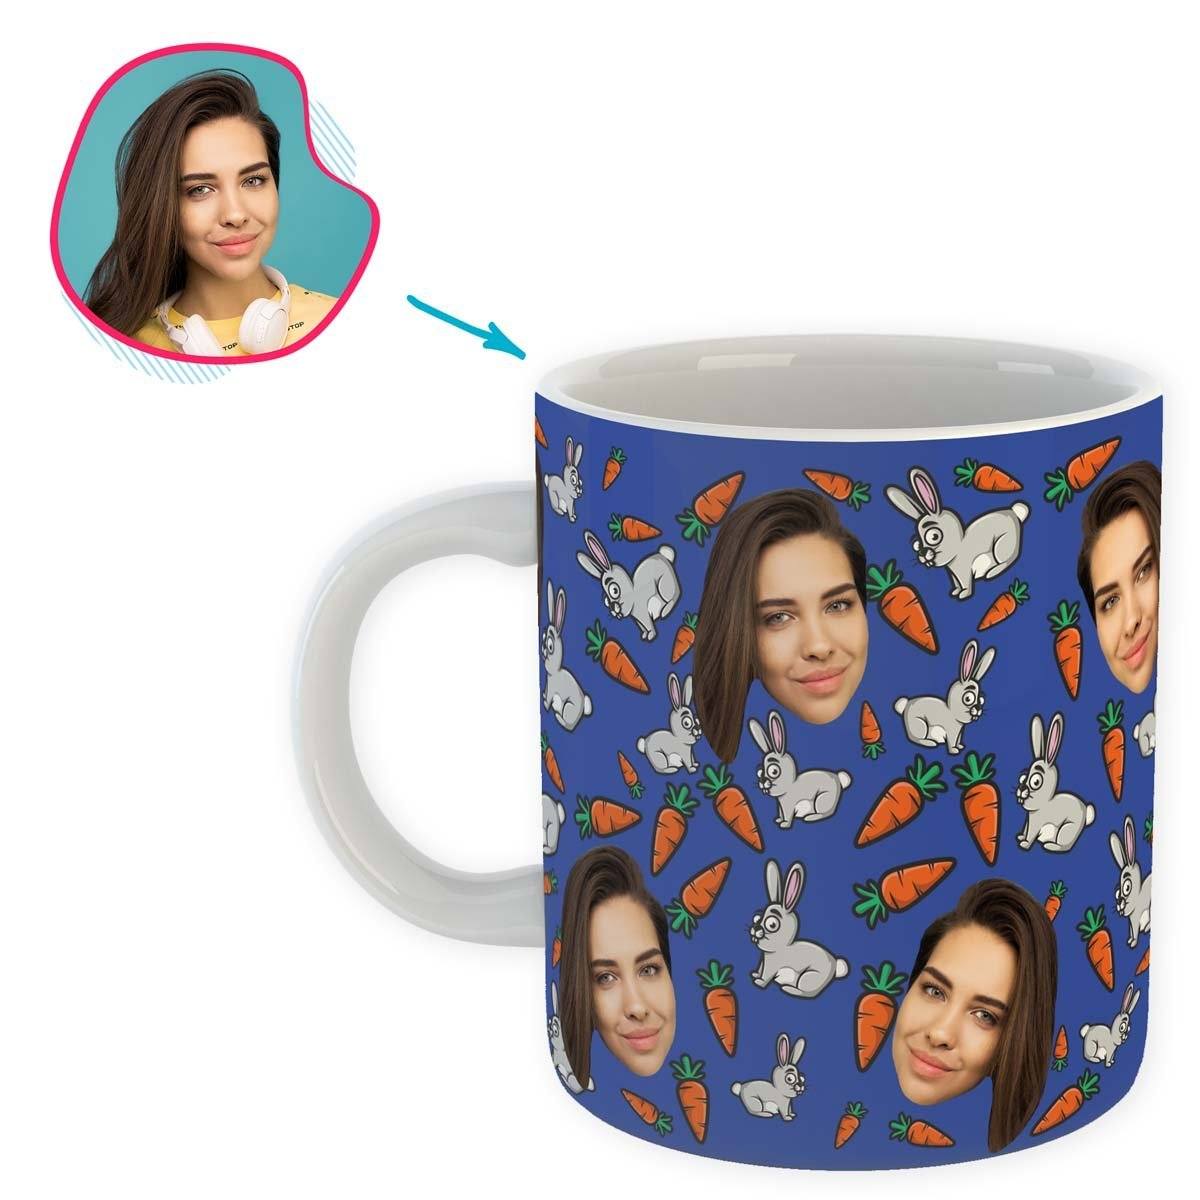 darkblue Bunny mug personalized with photo of face printed on it